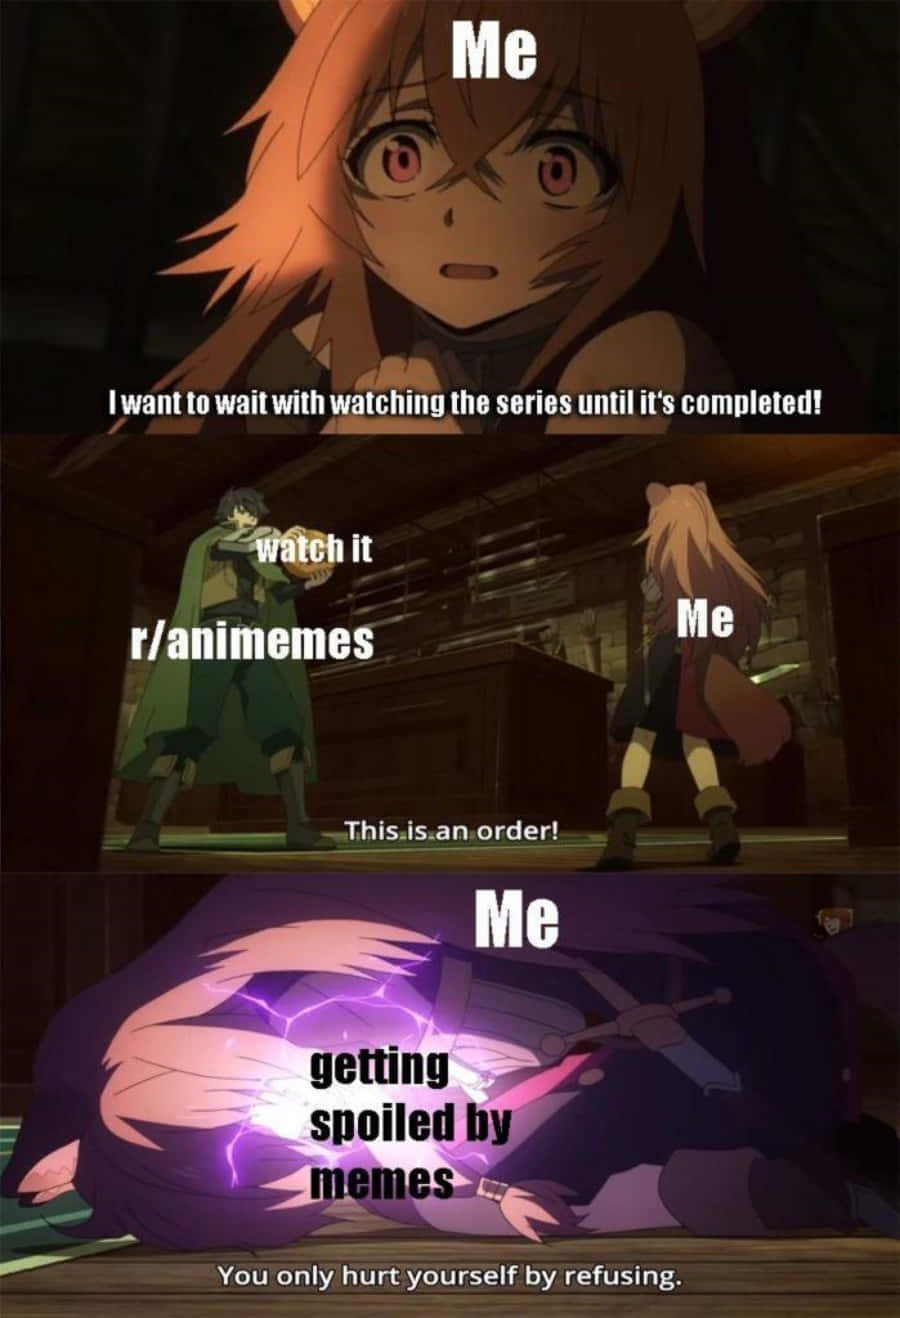 This "anime meme" is sure to make you smile!